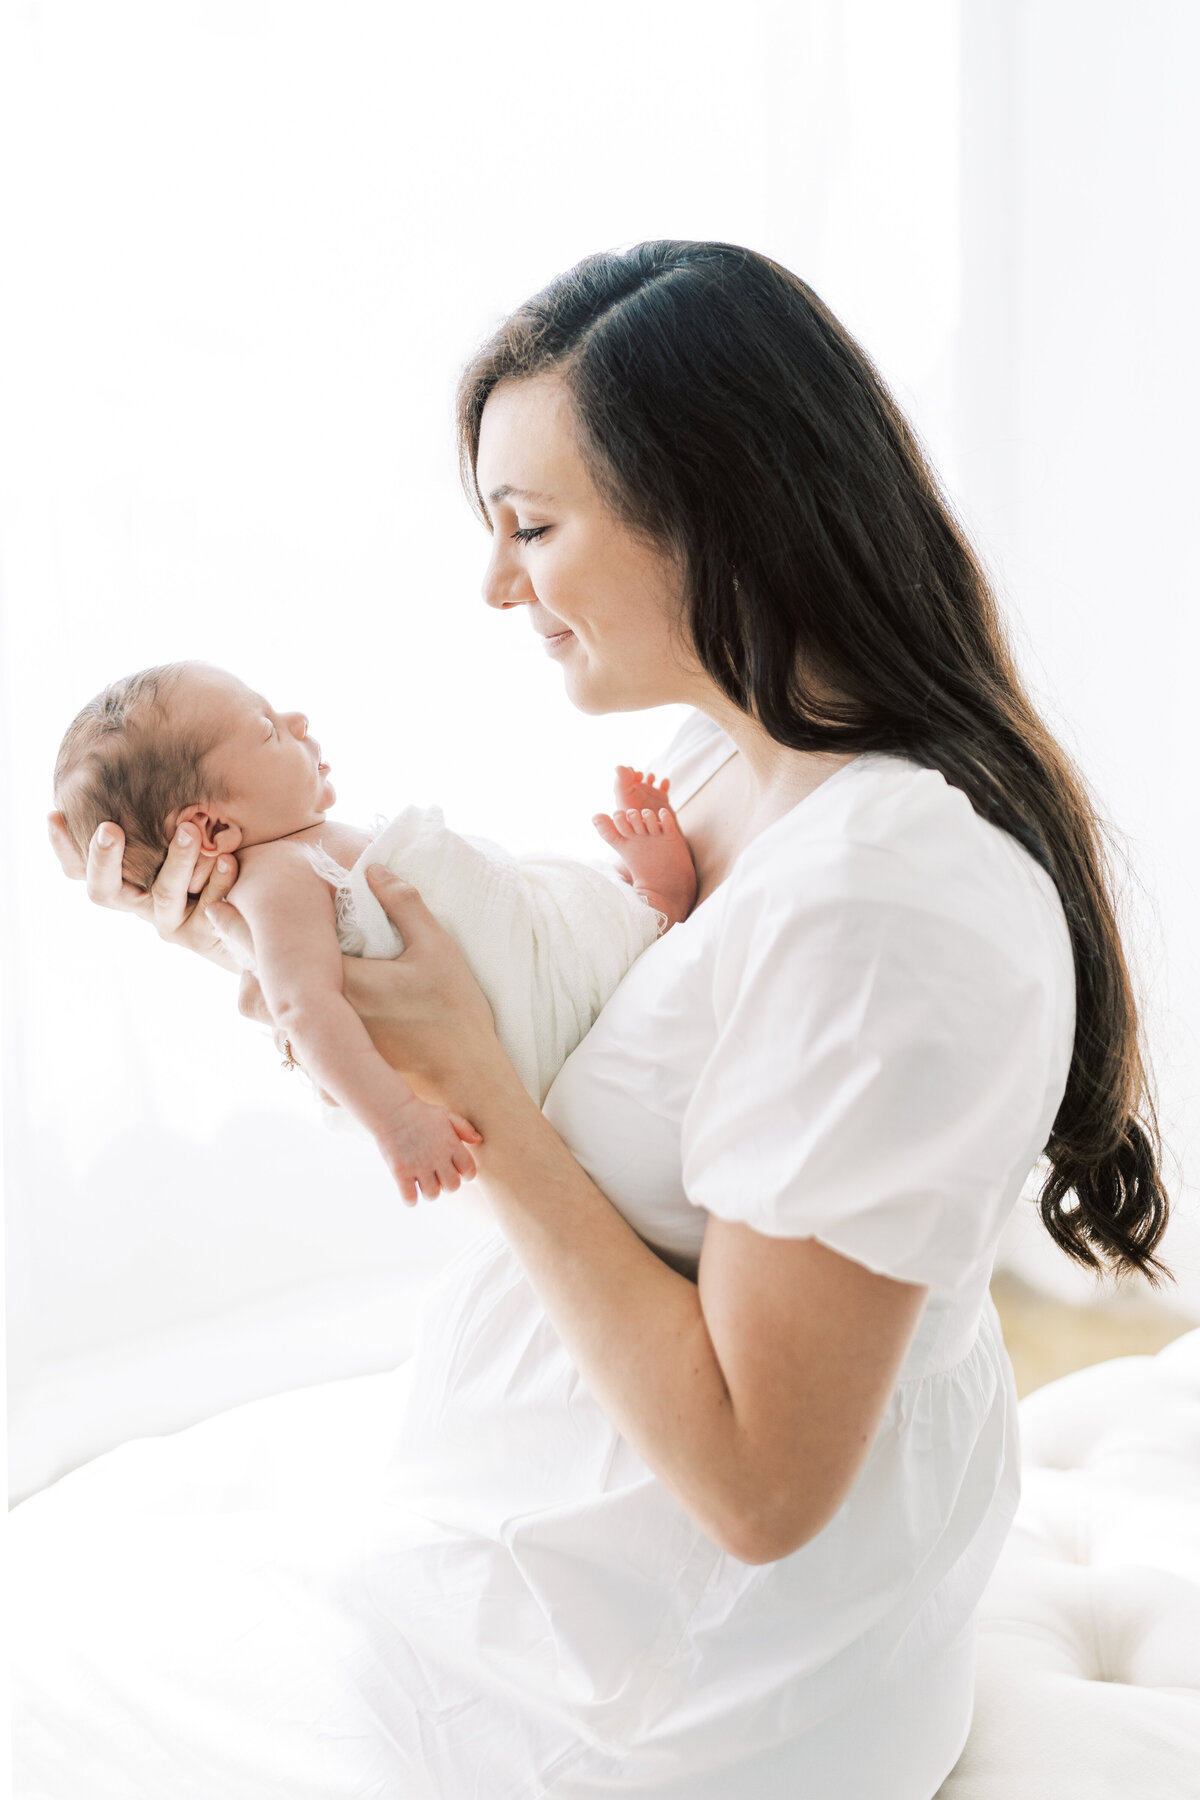 Portrait of a woman wearing a white dress and holding a swaddled newborn baby in front of her in a light and airy room.